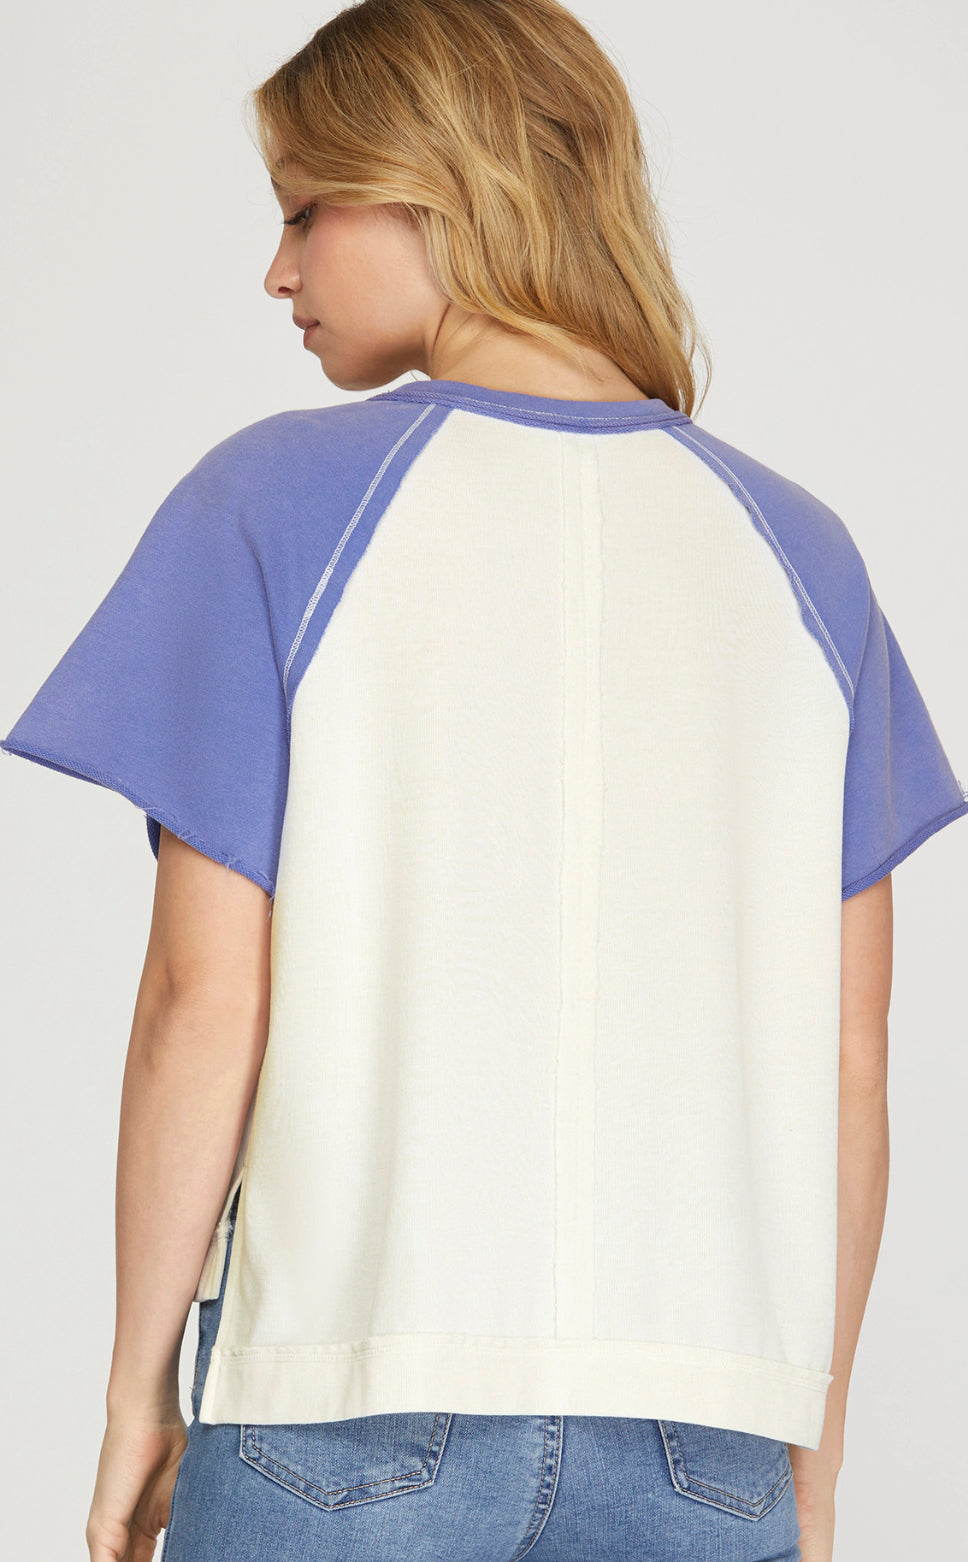 White with blue sleeves colorblock raglan henley tee